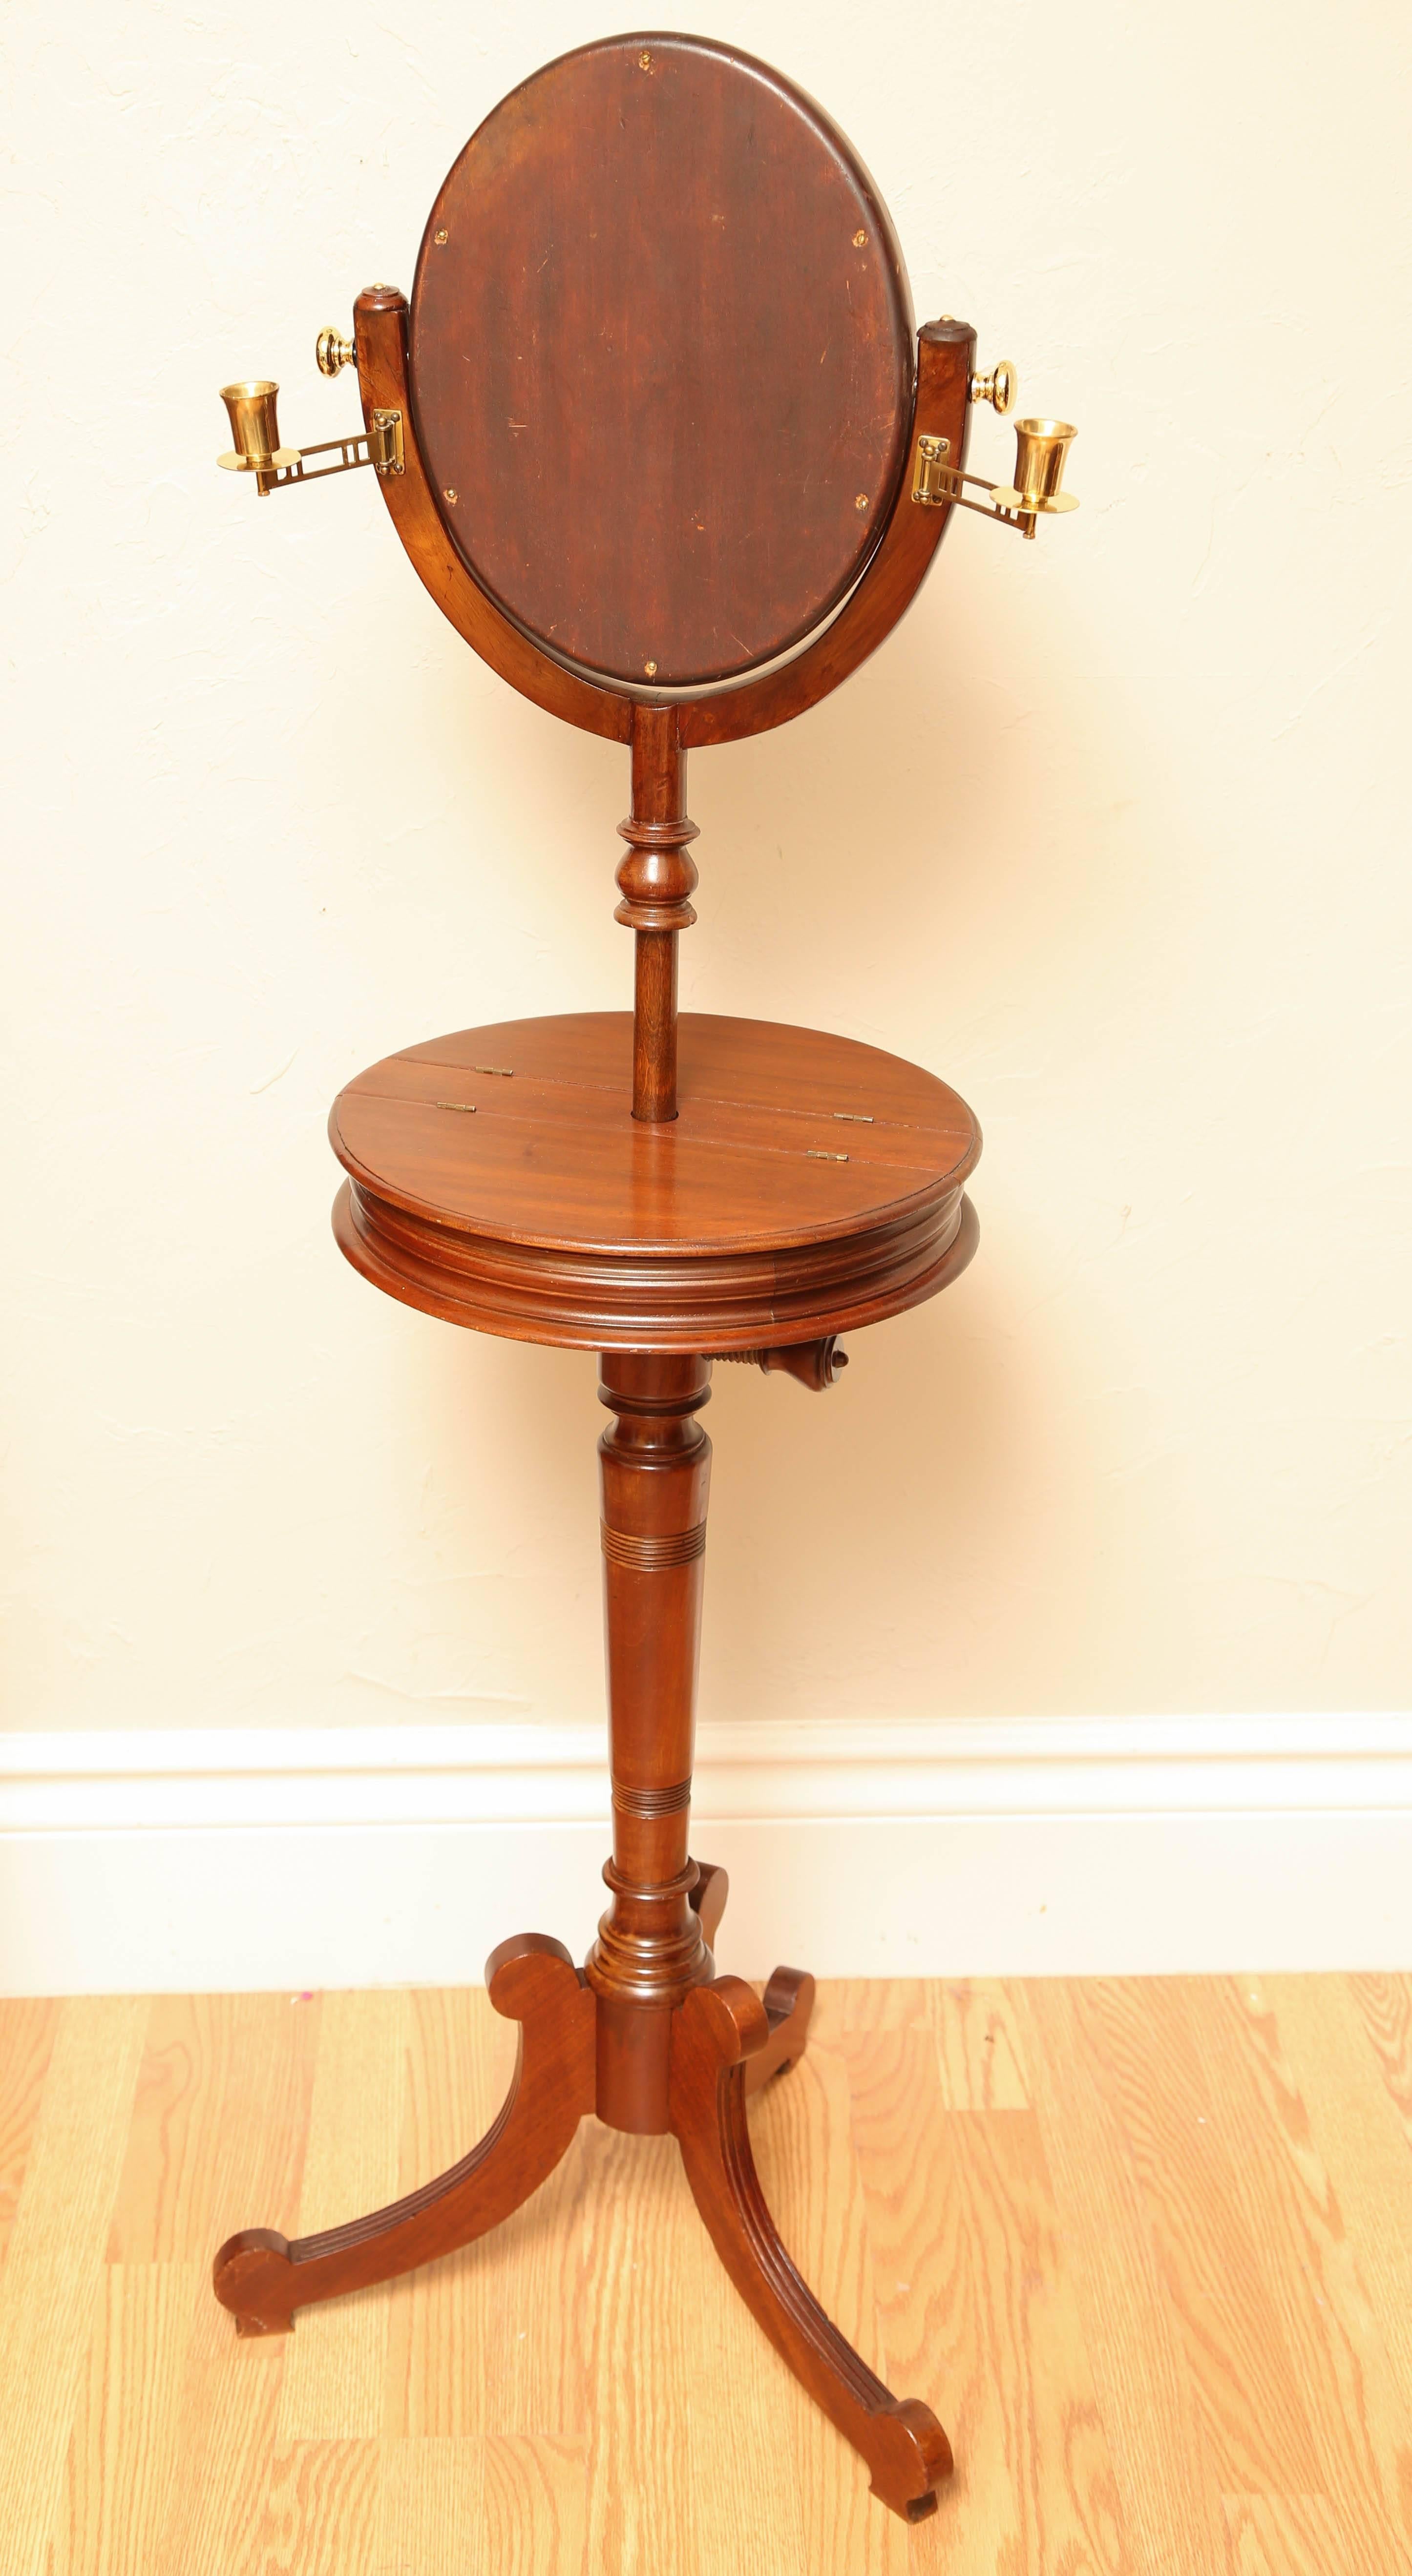 Antique shaving stand with tilting beveled mirror and two candleholders. The tabletop is 15